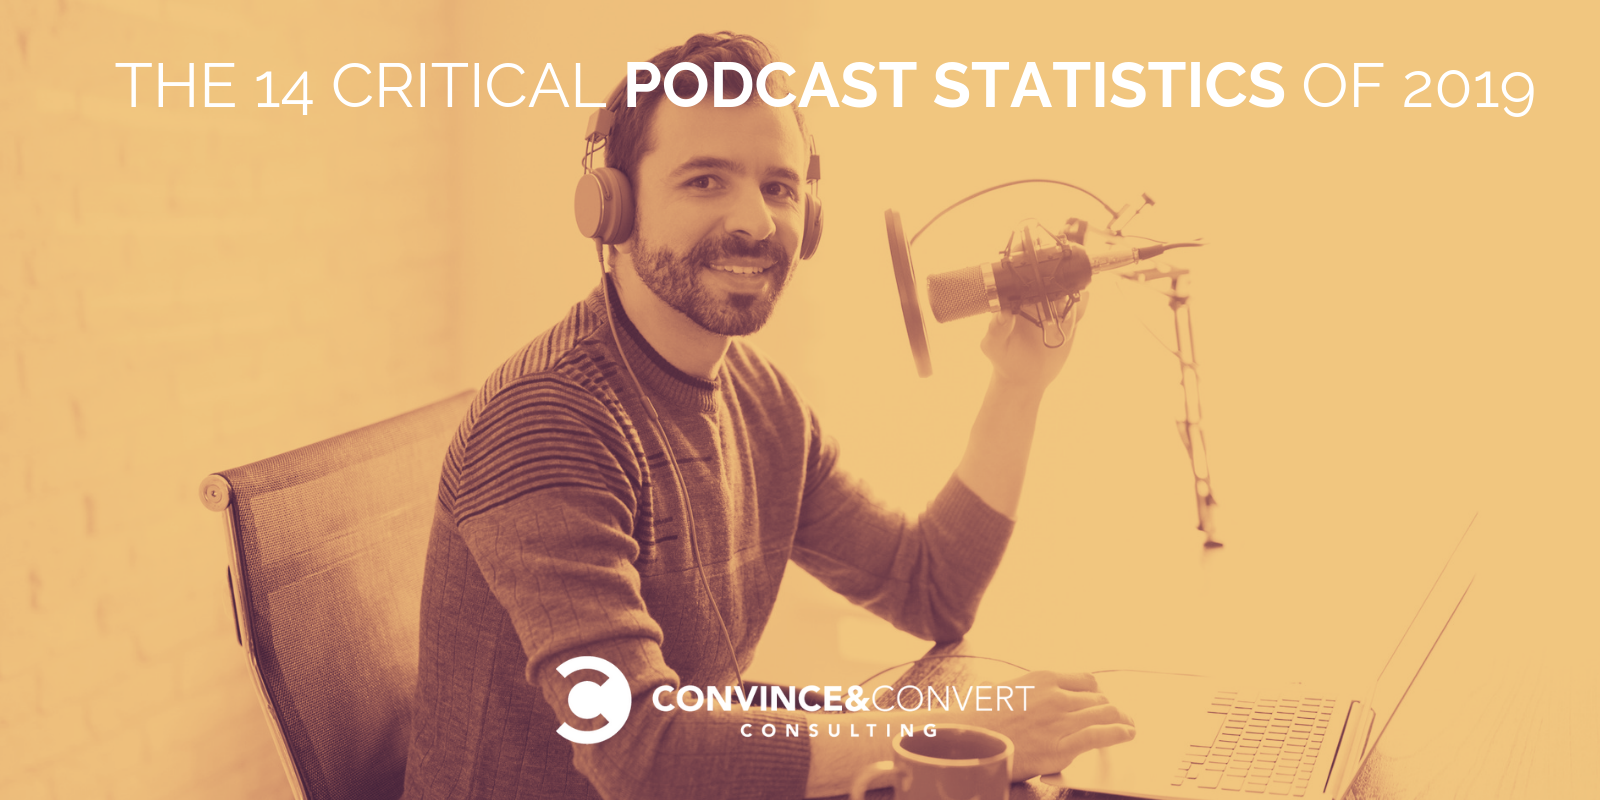 The 14 Critical Podcast Statistics of 2019